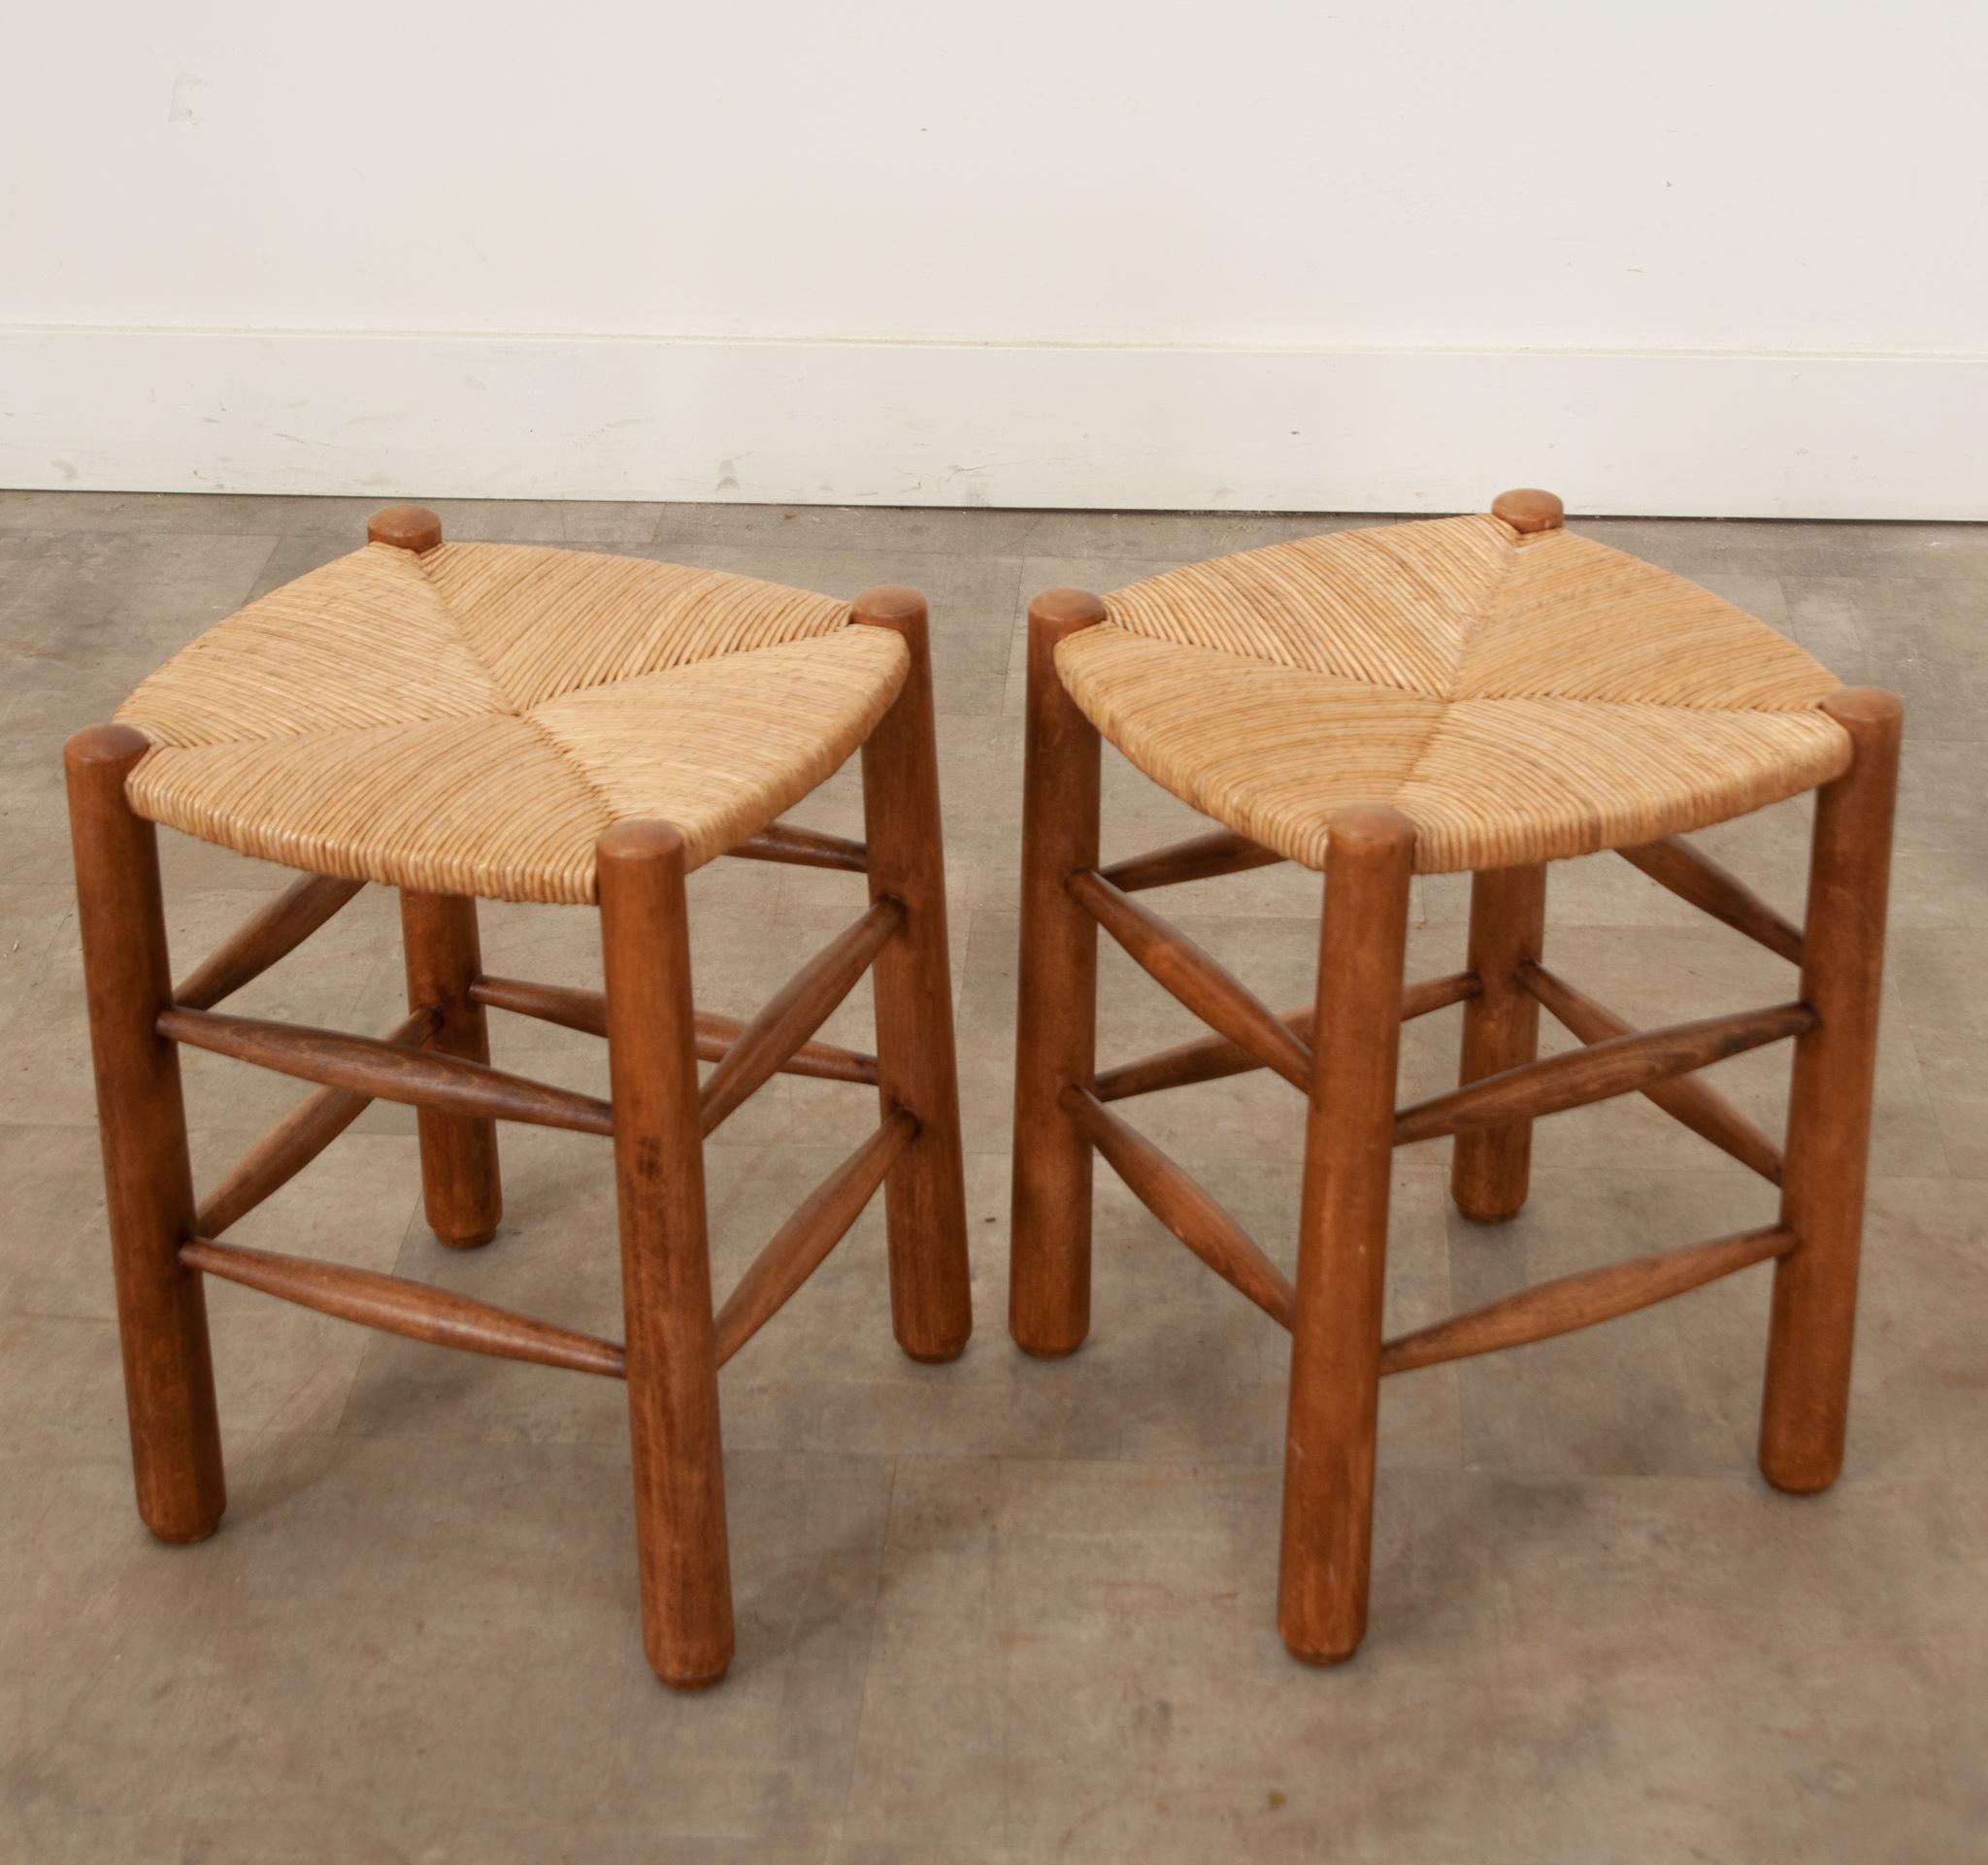 A vintage pair of rustic French rush seat & walnut stools in the style of Charlotte Perriand. Hand-crafted in France at mid-century, these well made stools are comfortable and of solid wood construction with a rush woven seat. Sturdy tapering legs